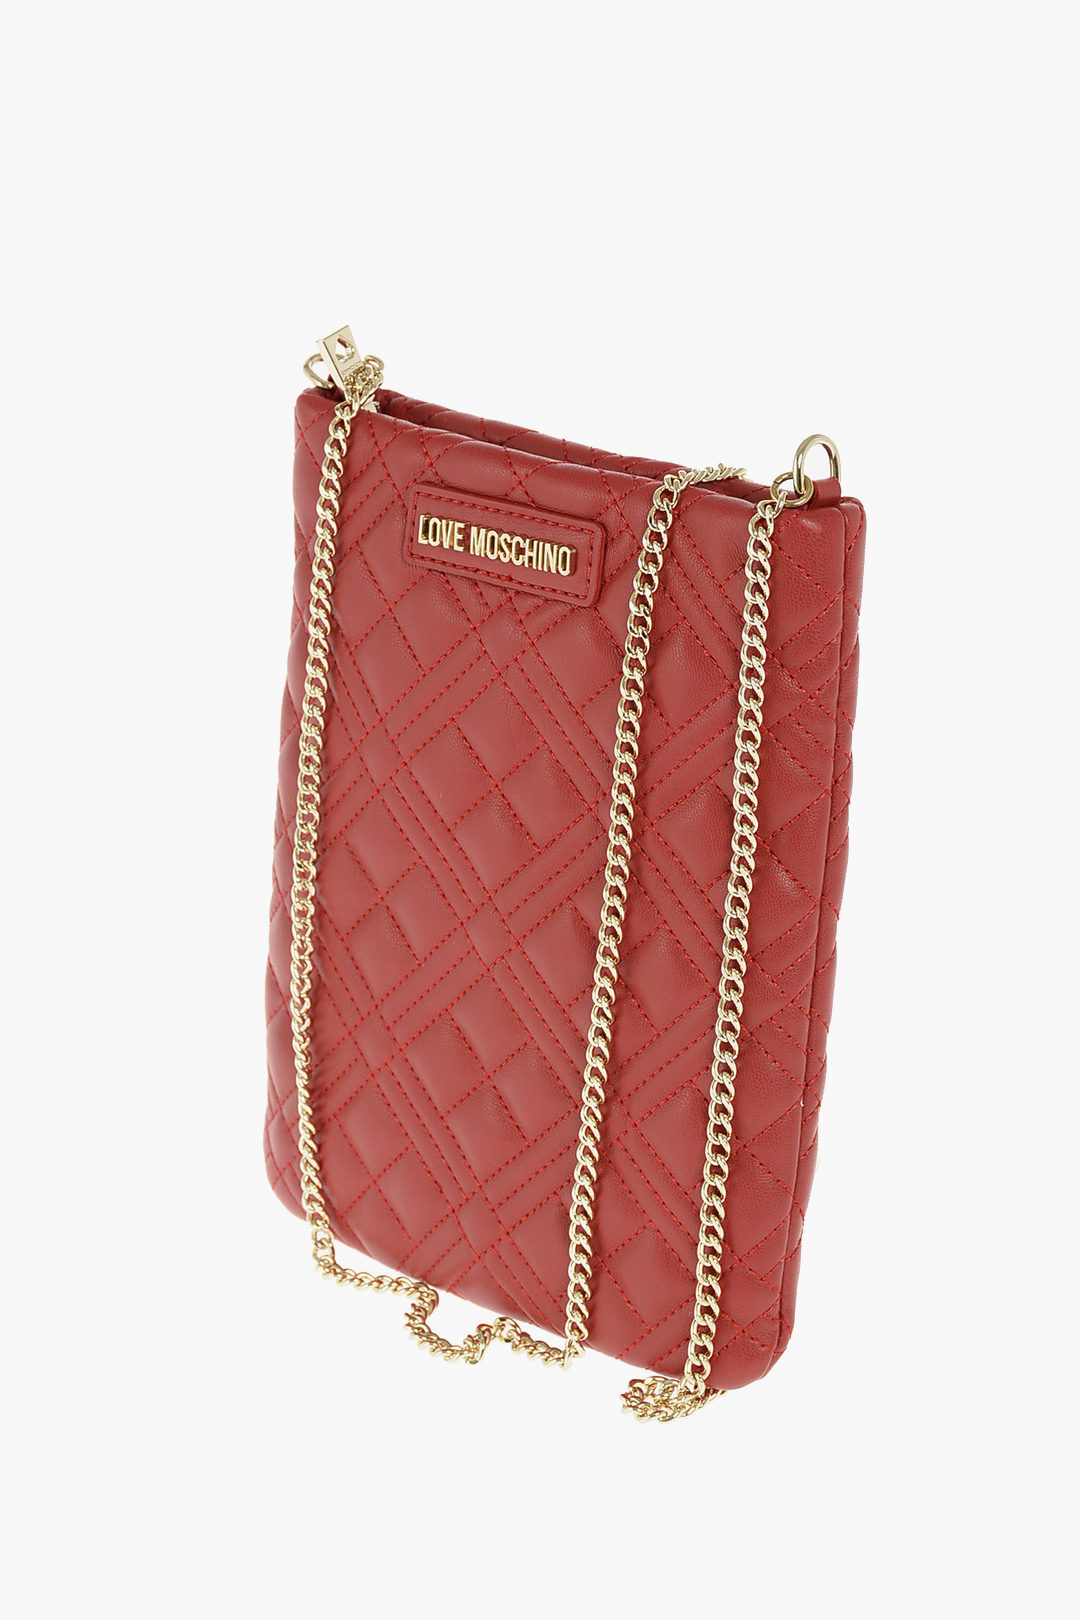 Quilted Faux Leather Crossbody Purse or Shoulder Bag for Women